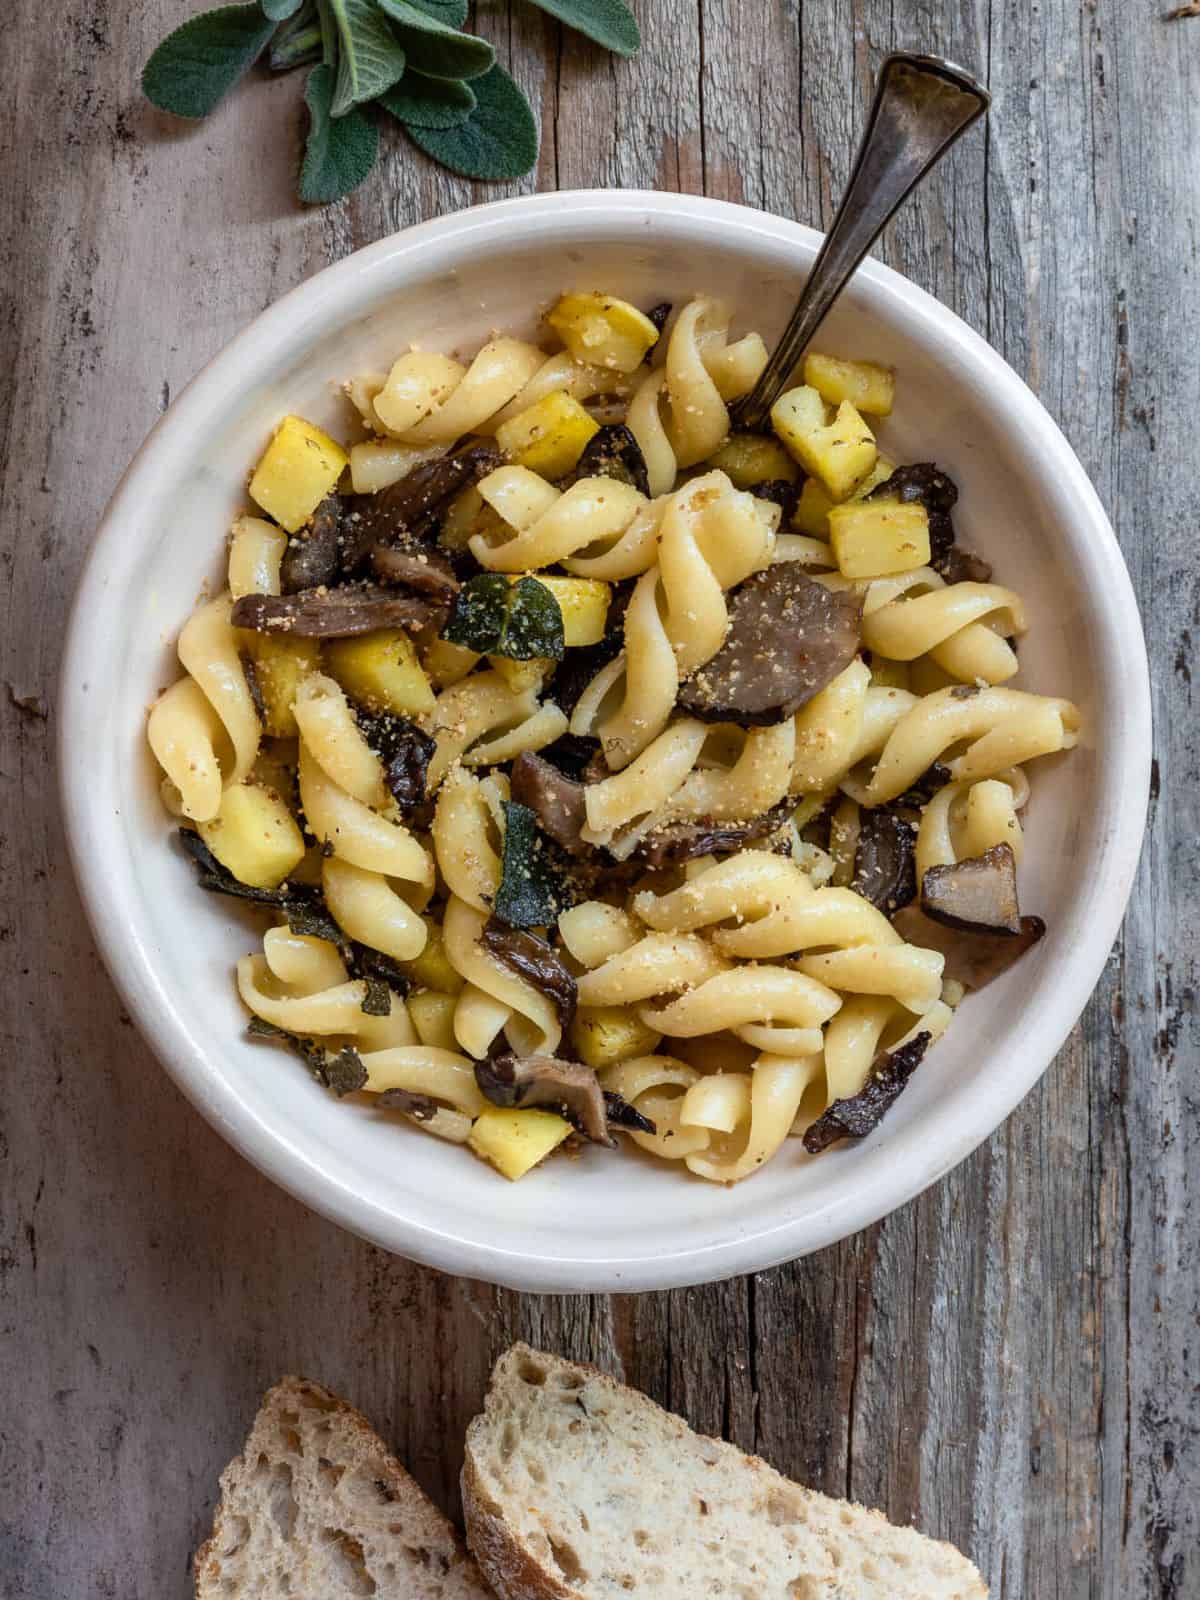 A view of Mushrooms Pasta with Potatoes and Sage in a light bowl on a rustic wooden table. The dish shown mushrooms, potatoes and browned sage on top. On the side some fresh sage and 2 slices of bread